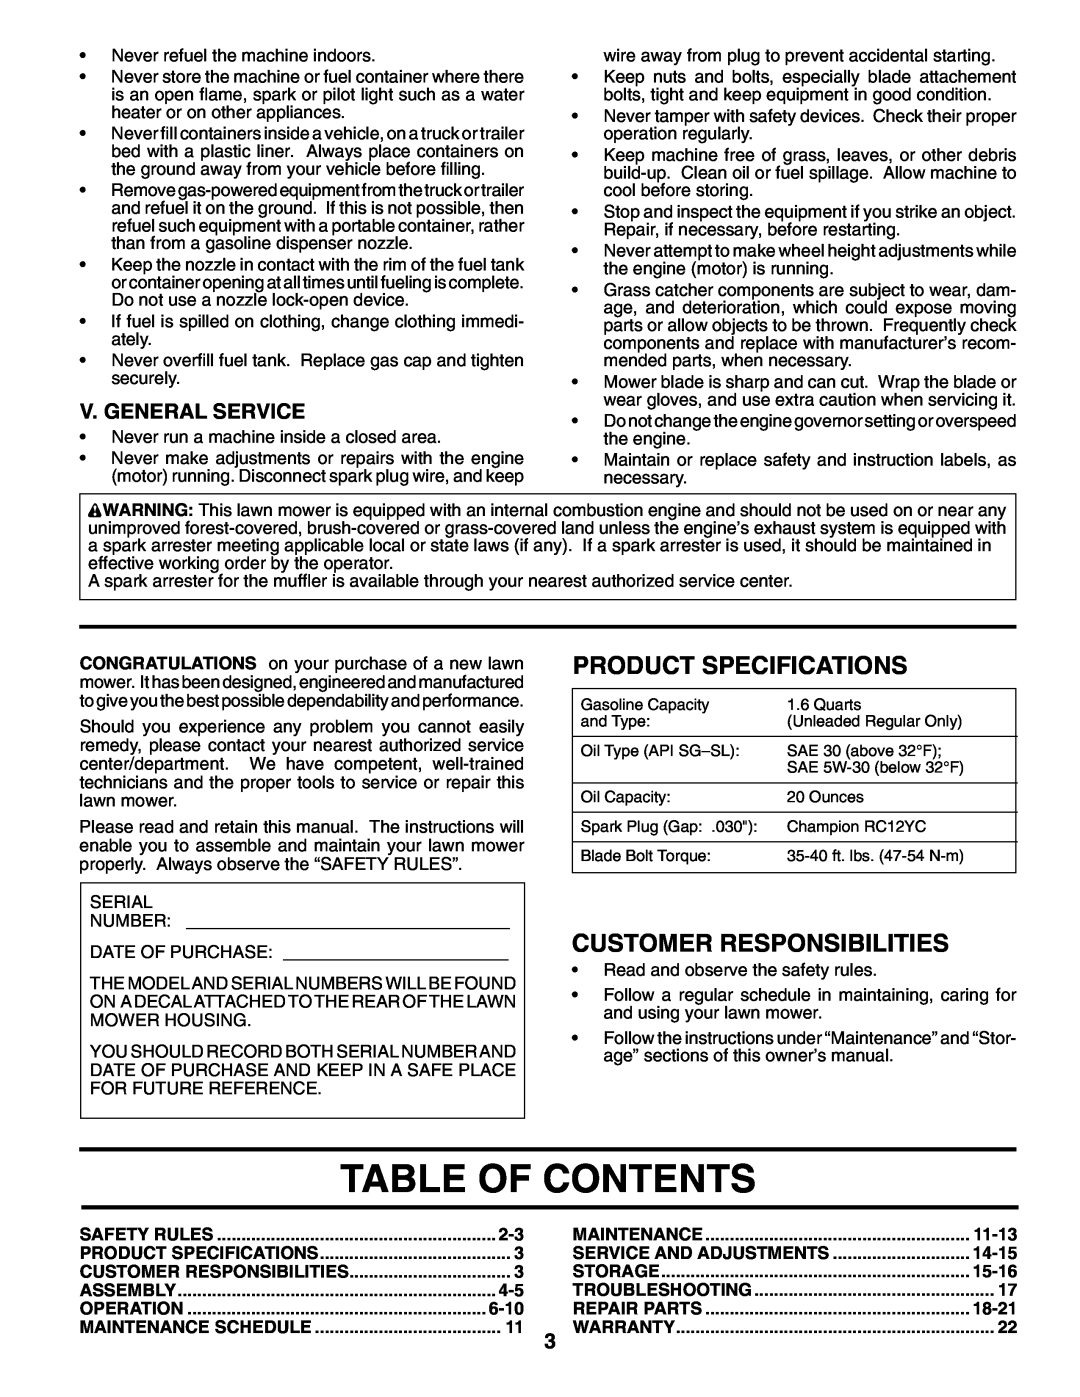 Husqvarna 7021RES Table Of Contents, Product Specifications, Customer Responsibilities, V. General Service, 6-10, 11-13 